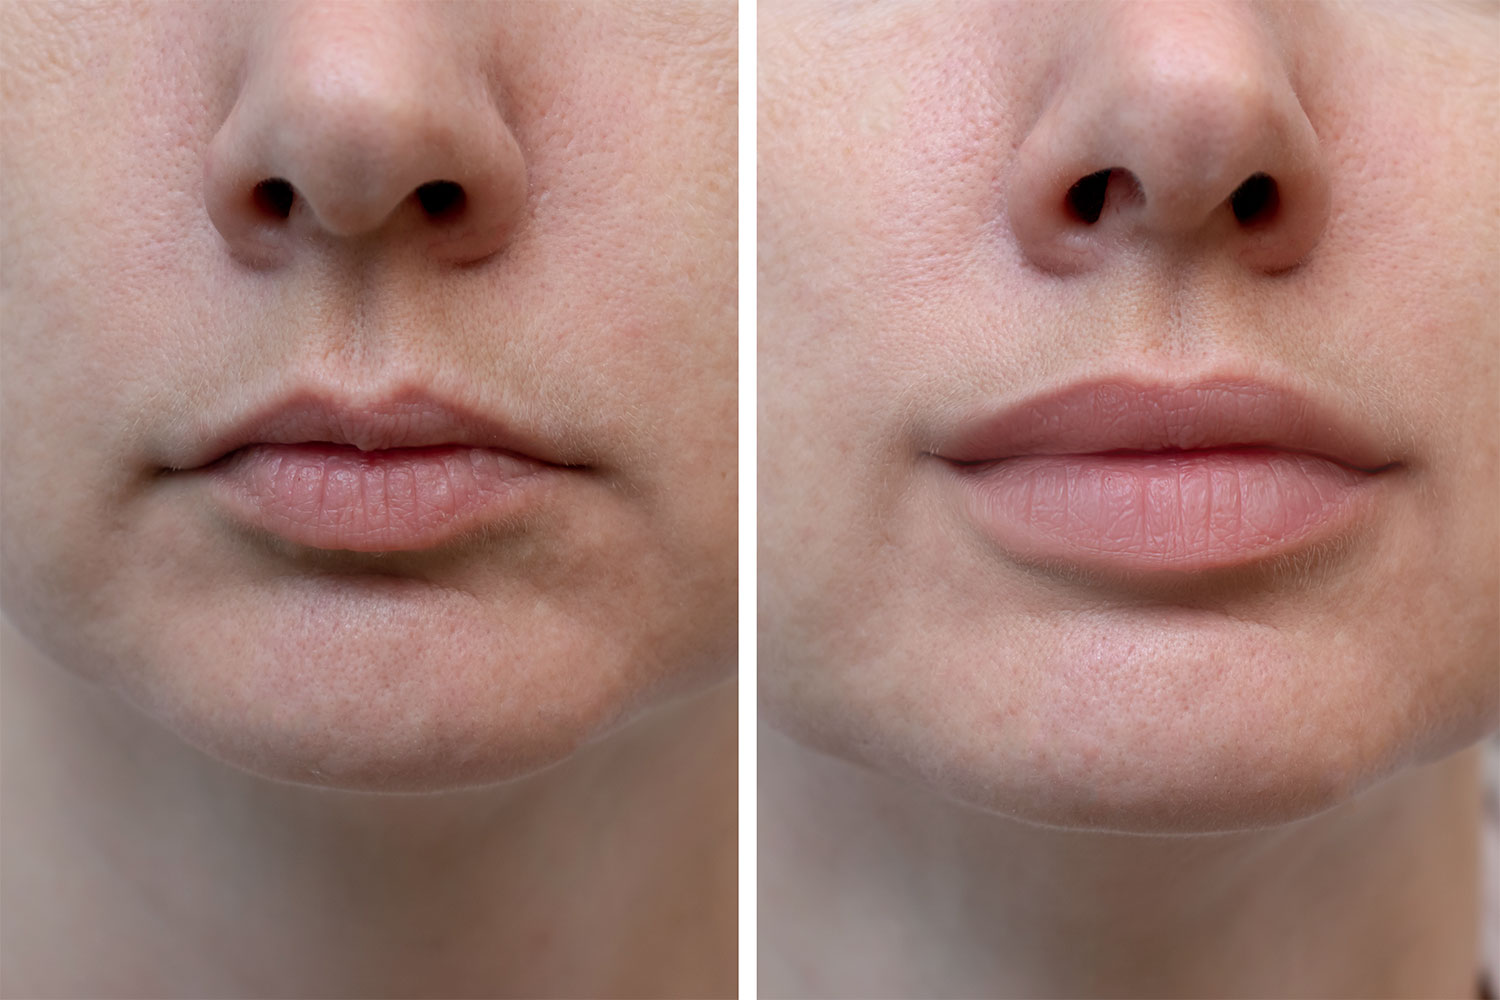 Plump and enhance the lips Before & after Treatment images in South Jordan, UT | SkinLumi Aesthetics